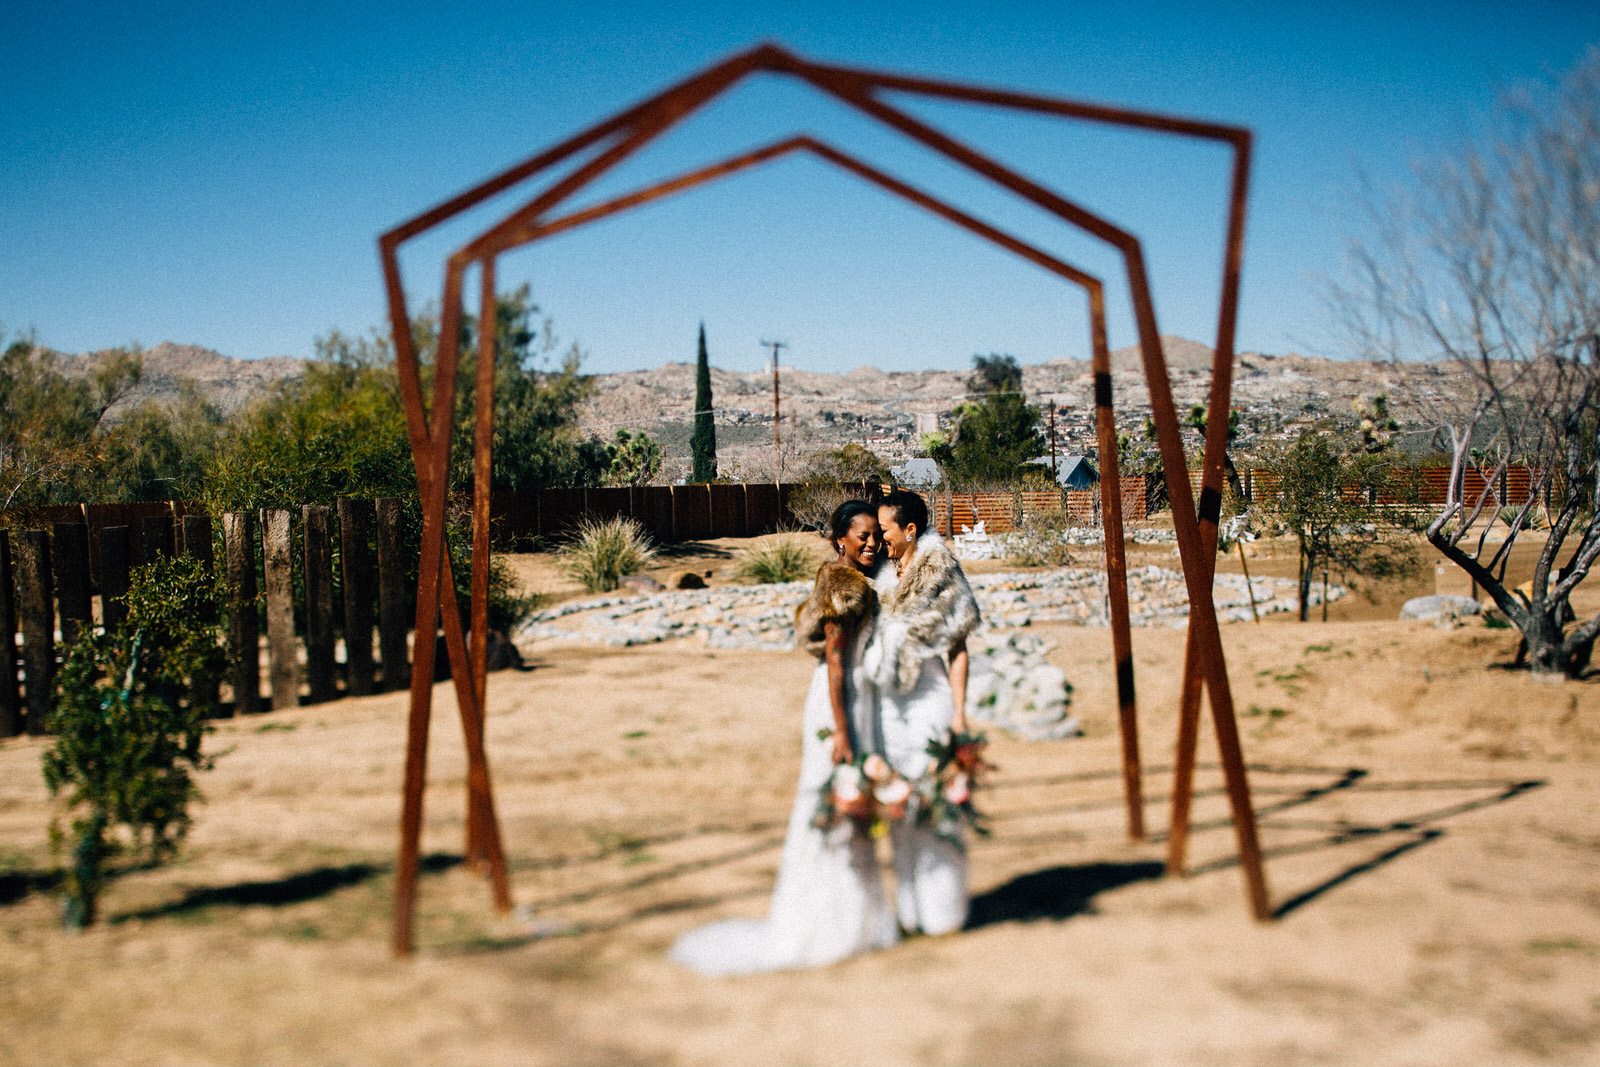 palm springs joshua tree elopement wedding styled shoot fuck yeah weddings feminist photo vaycay kendall lauren shea floral table arch alter lesbian lgbtq couple of color seattle photographer